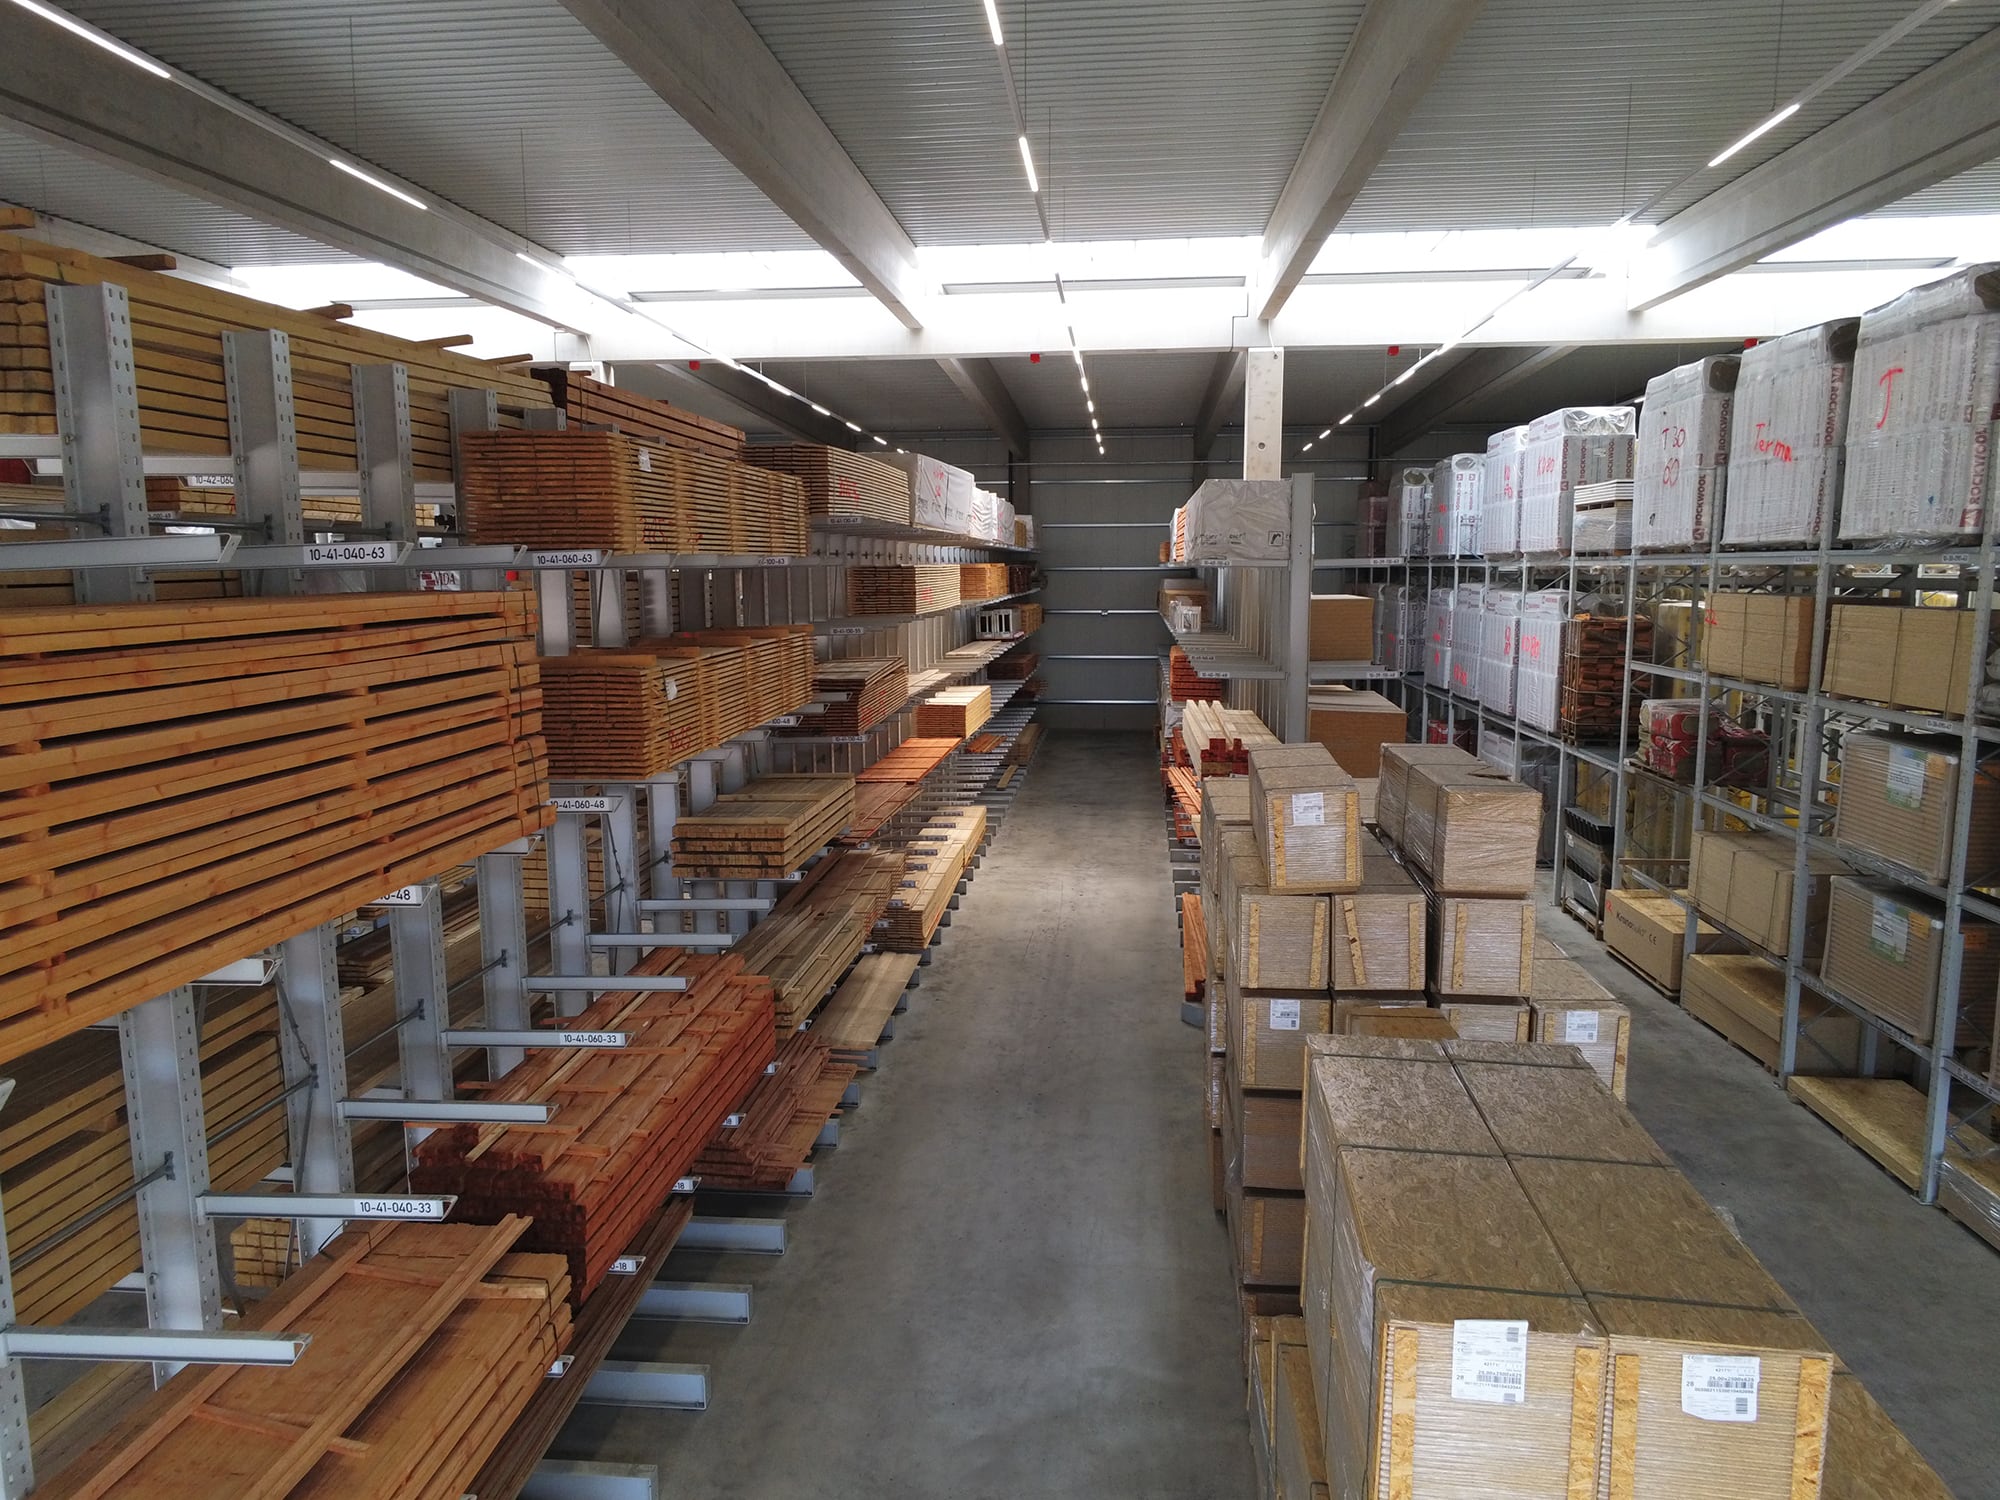 cantilever racking 